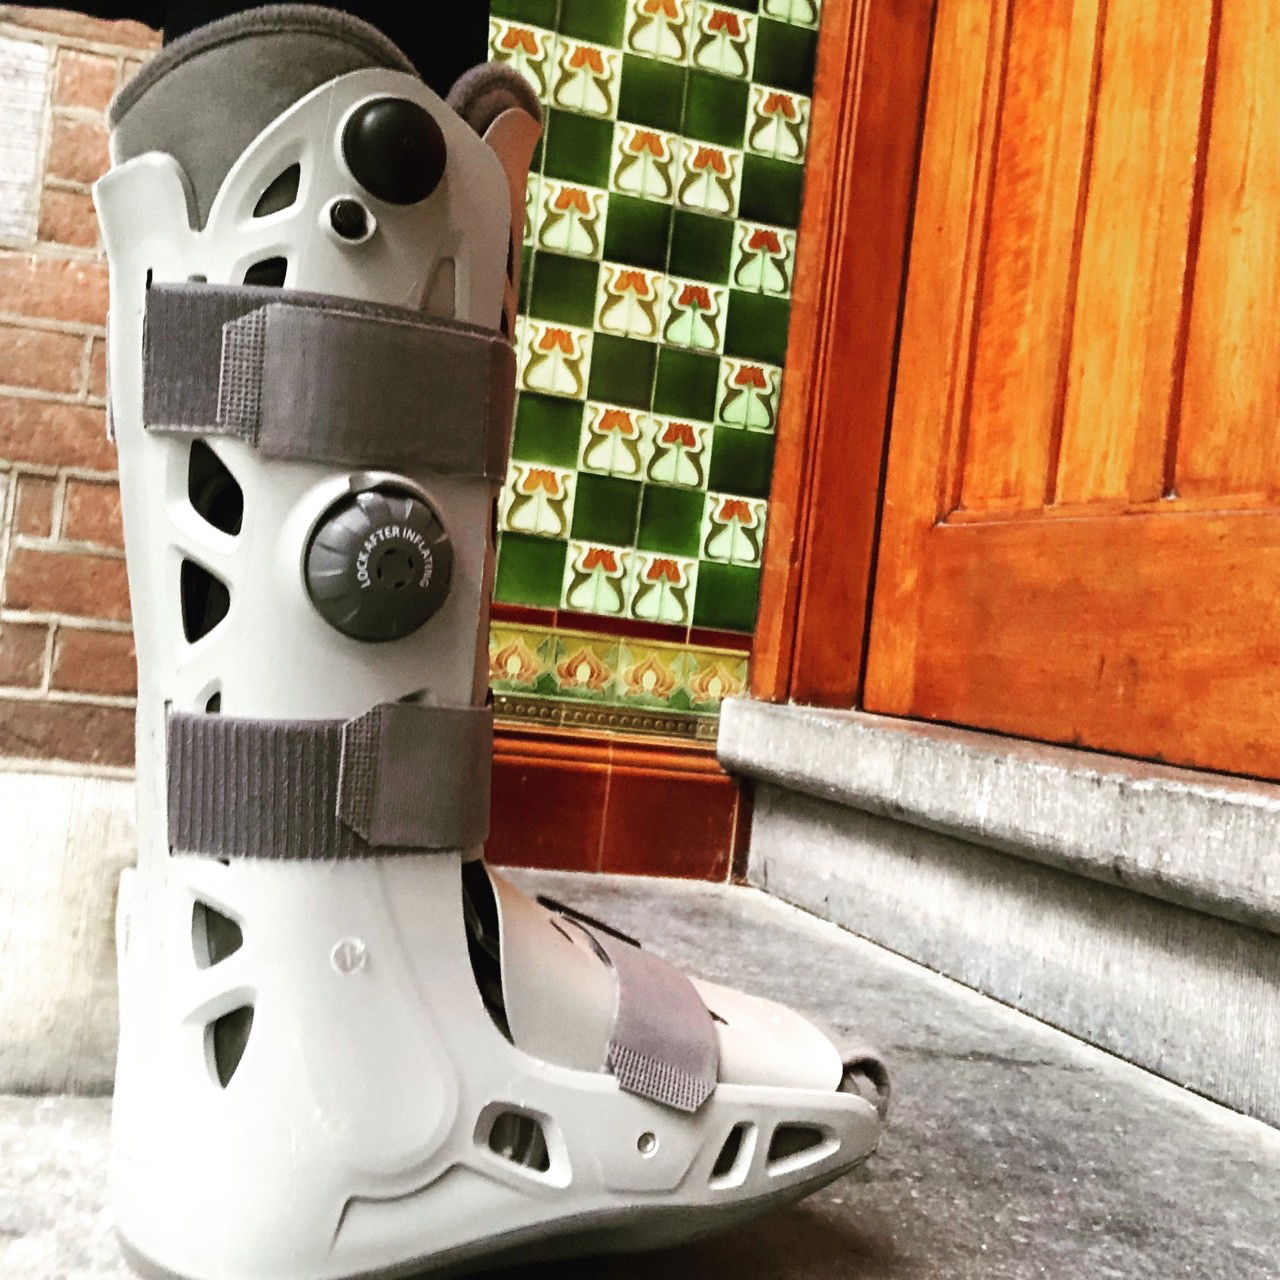 Watch the Photo by ampstef with the username @ampstef, posted on June 29, 2018 and the text says 'castmande:

Some more steps today with my #camwalker #brokenleg #brokenfoot #gayfetish'